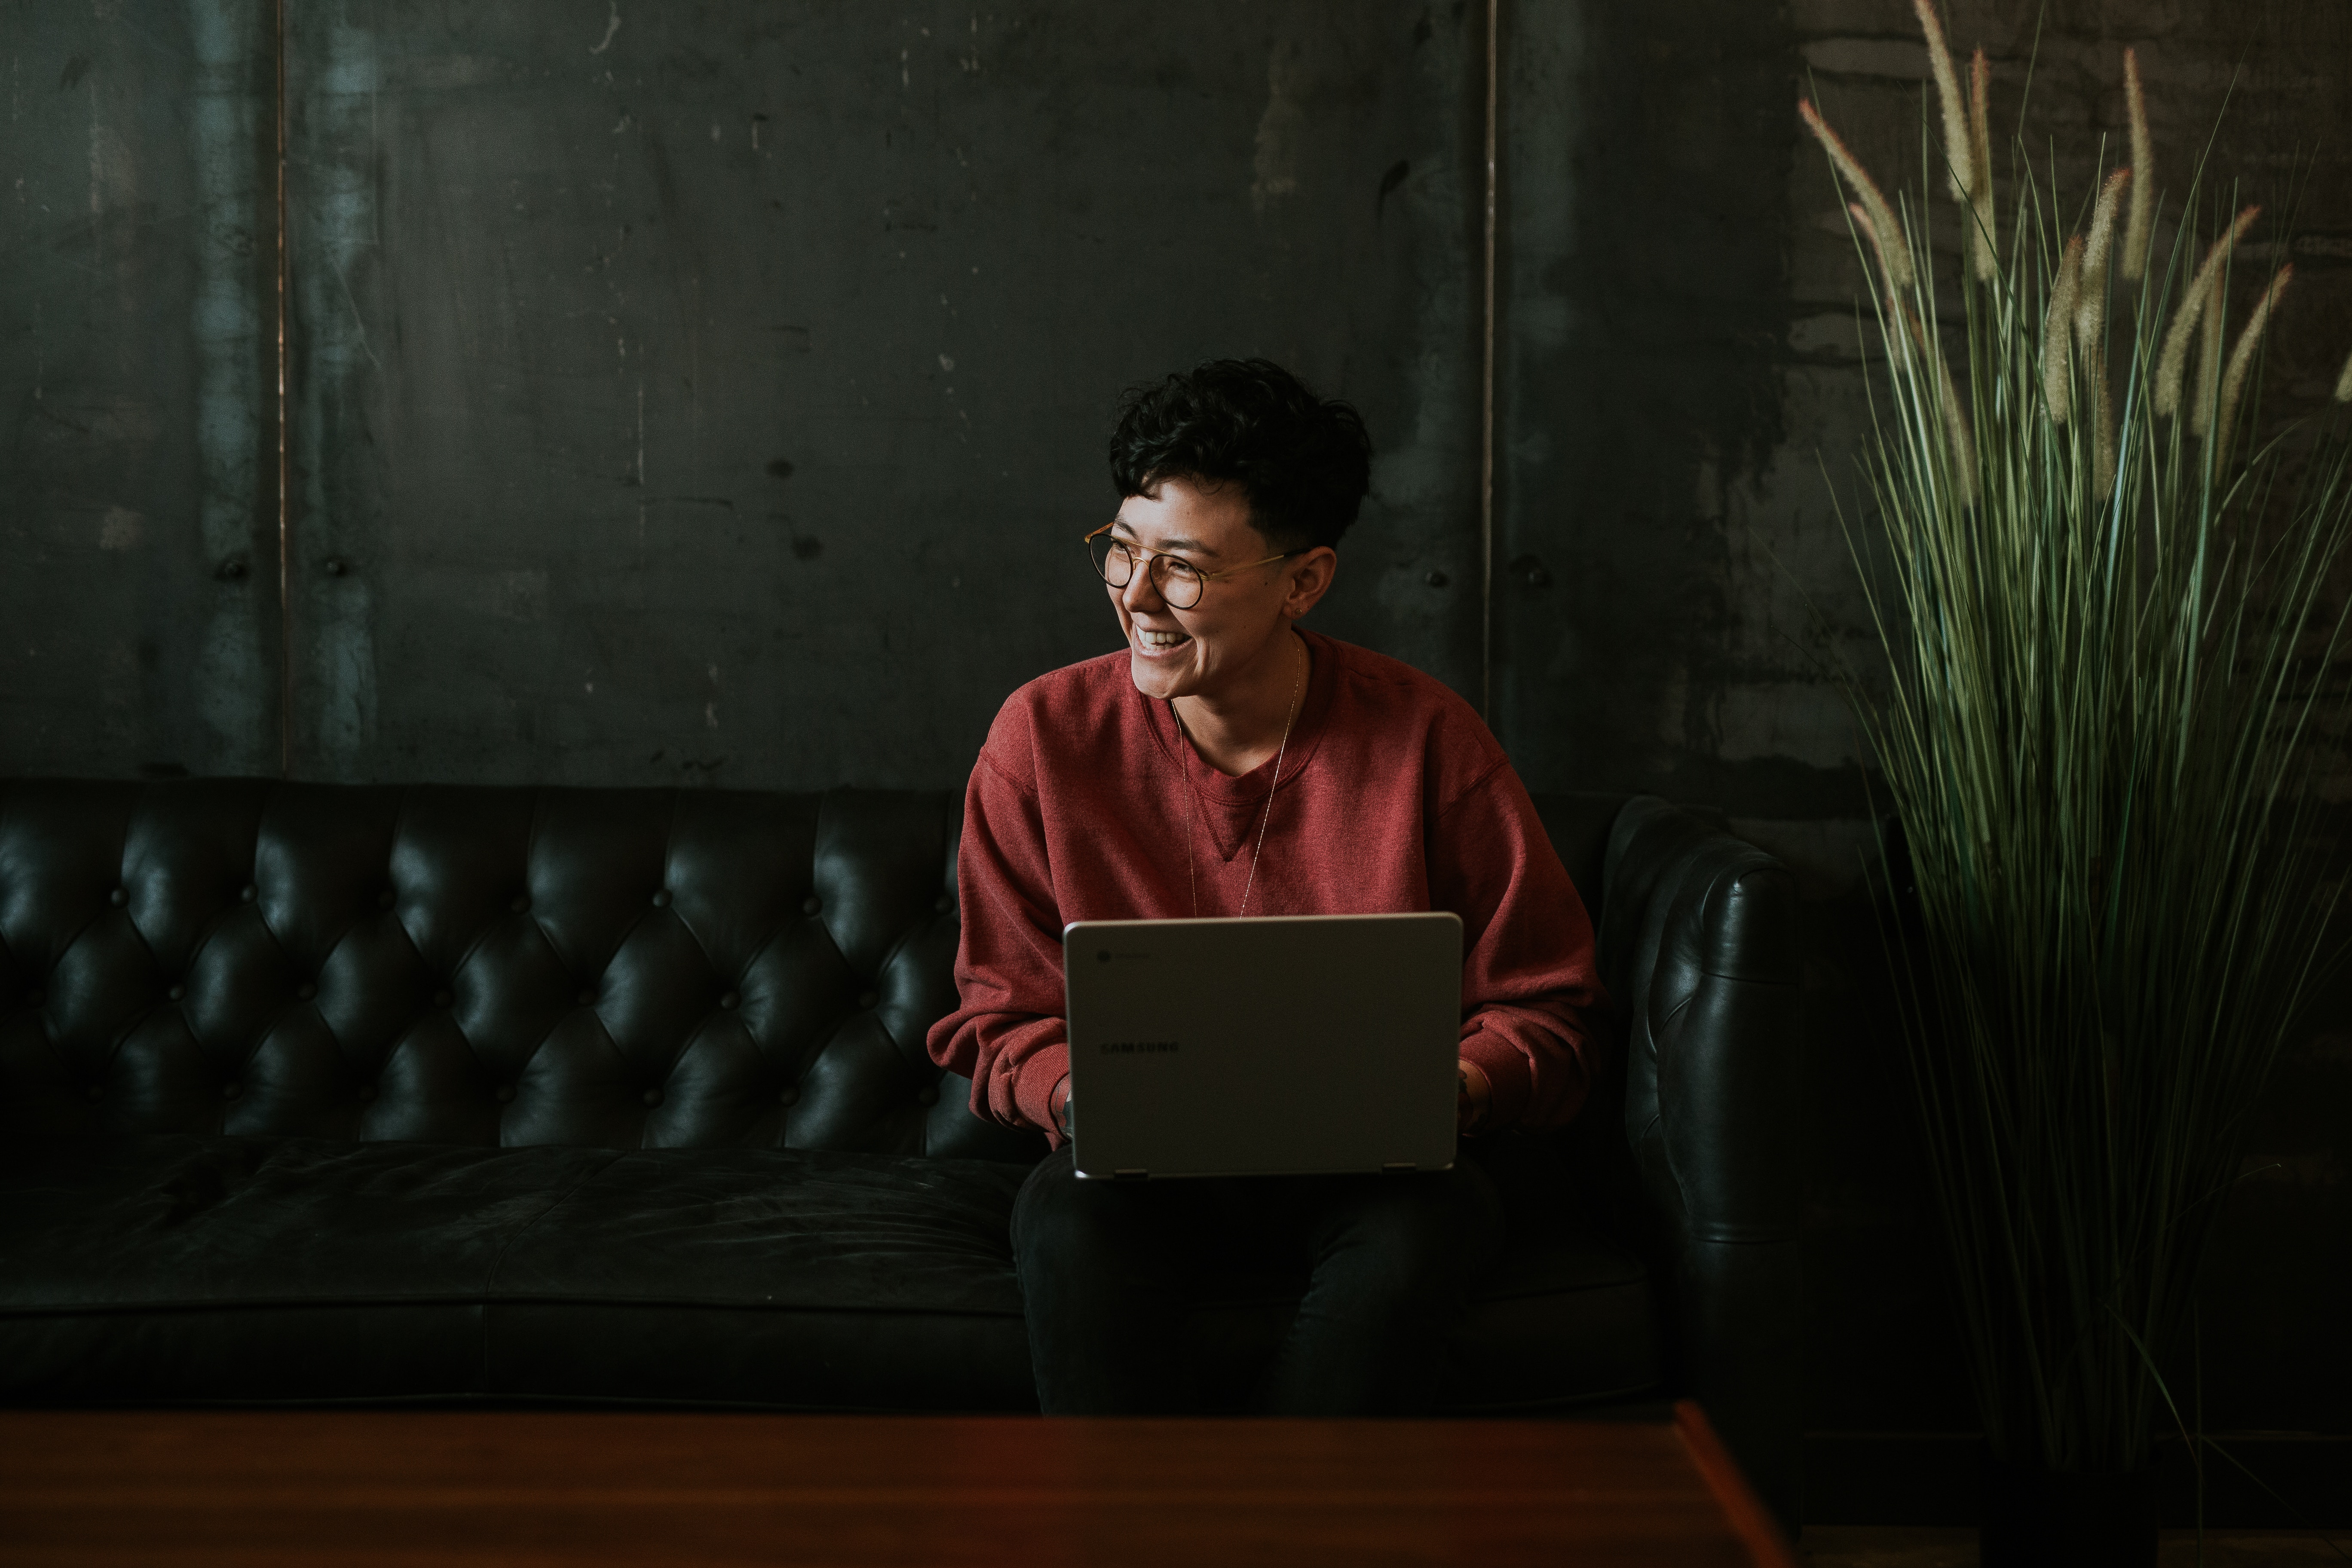 woman with glasses laughing while sitting on the couch photo by Brooke Cagle via Unsplash